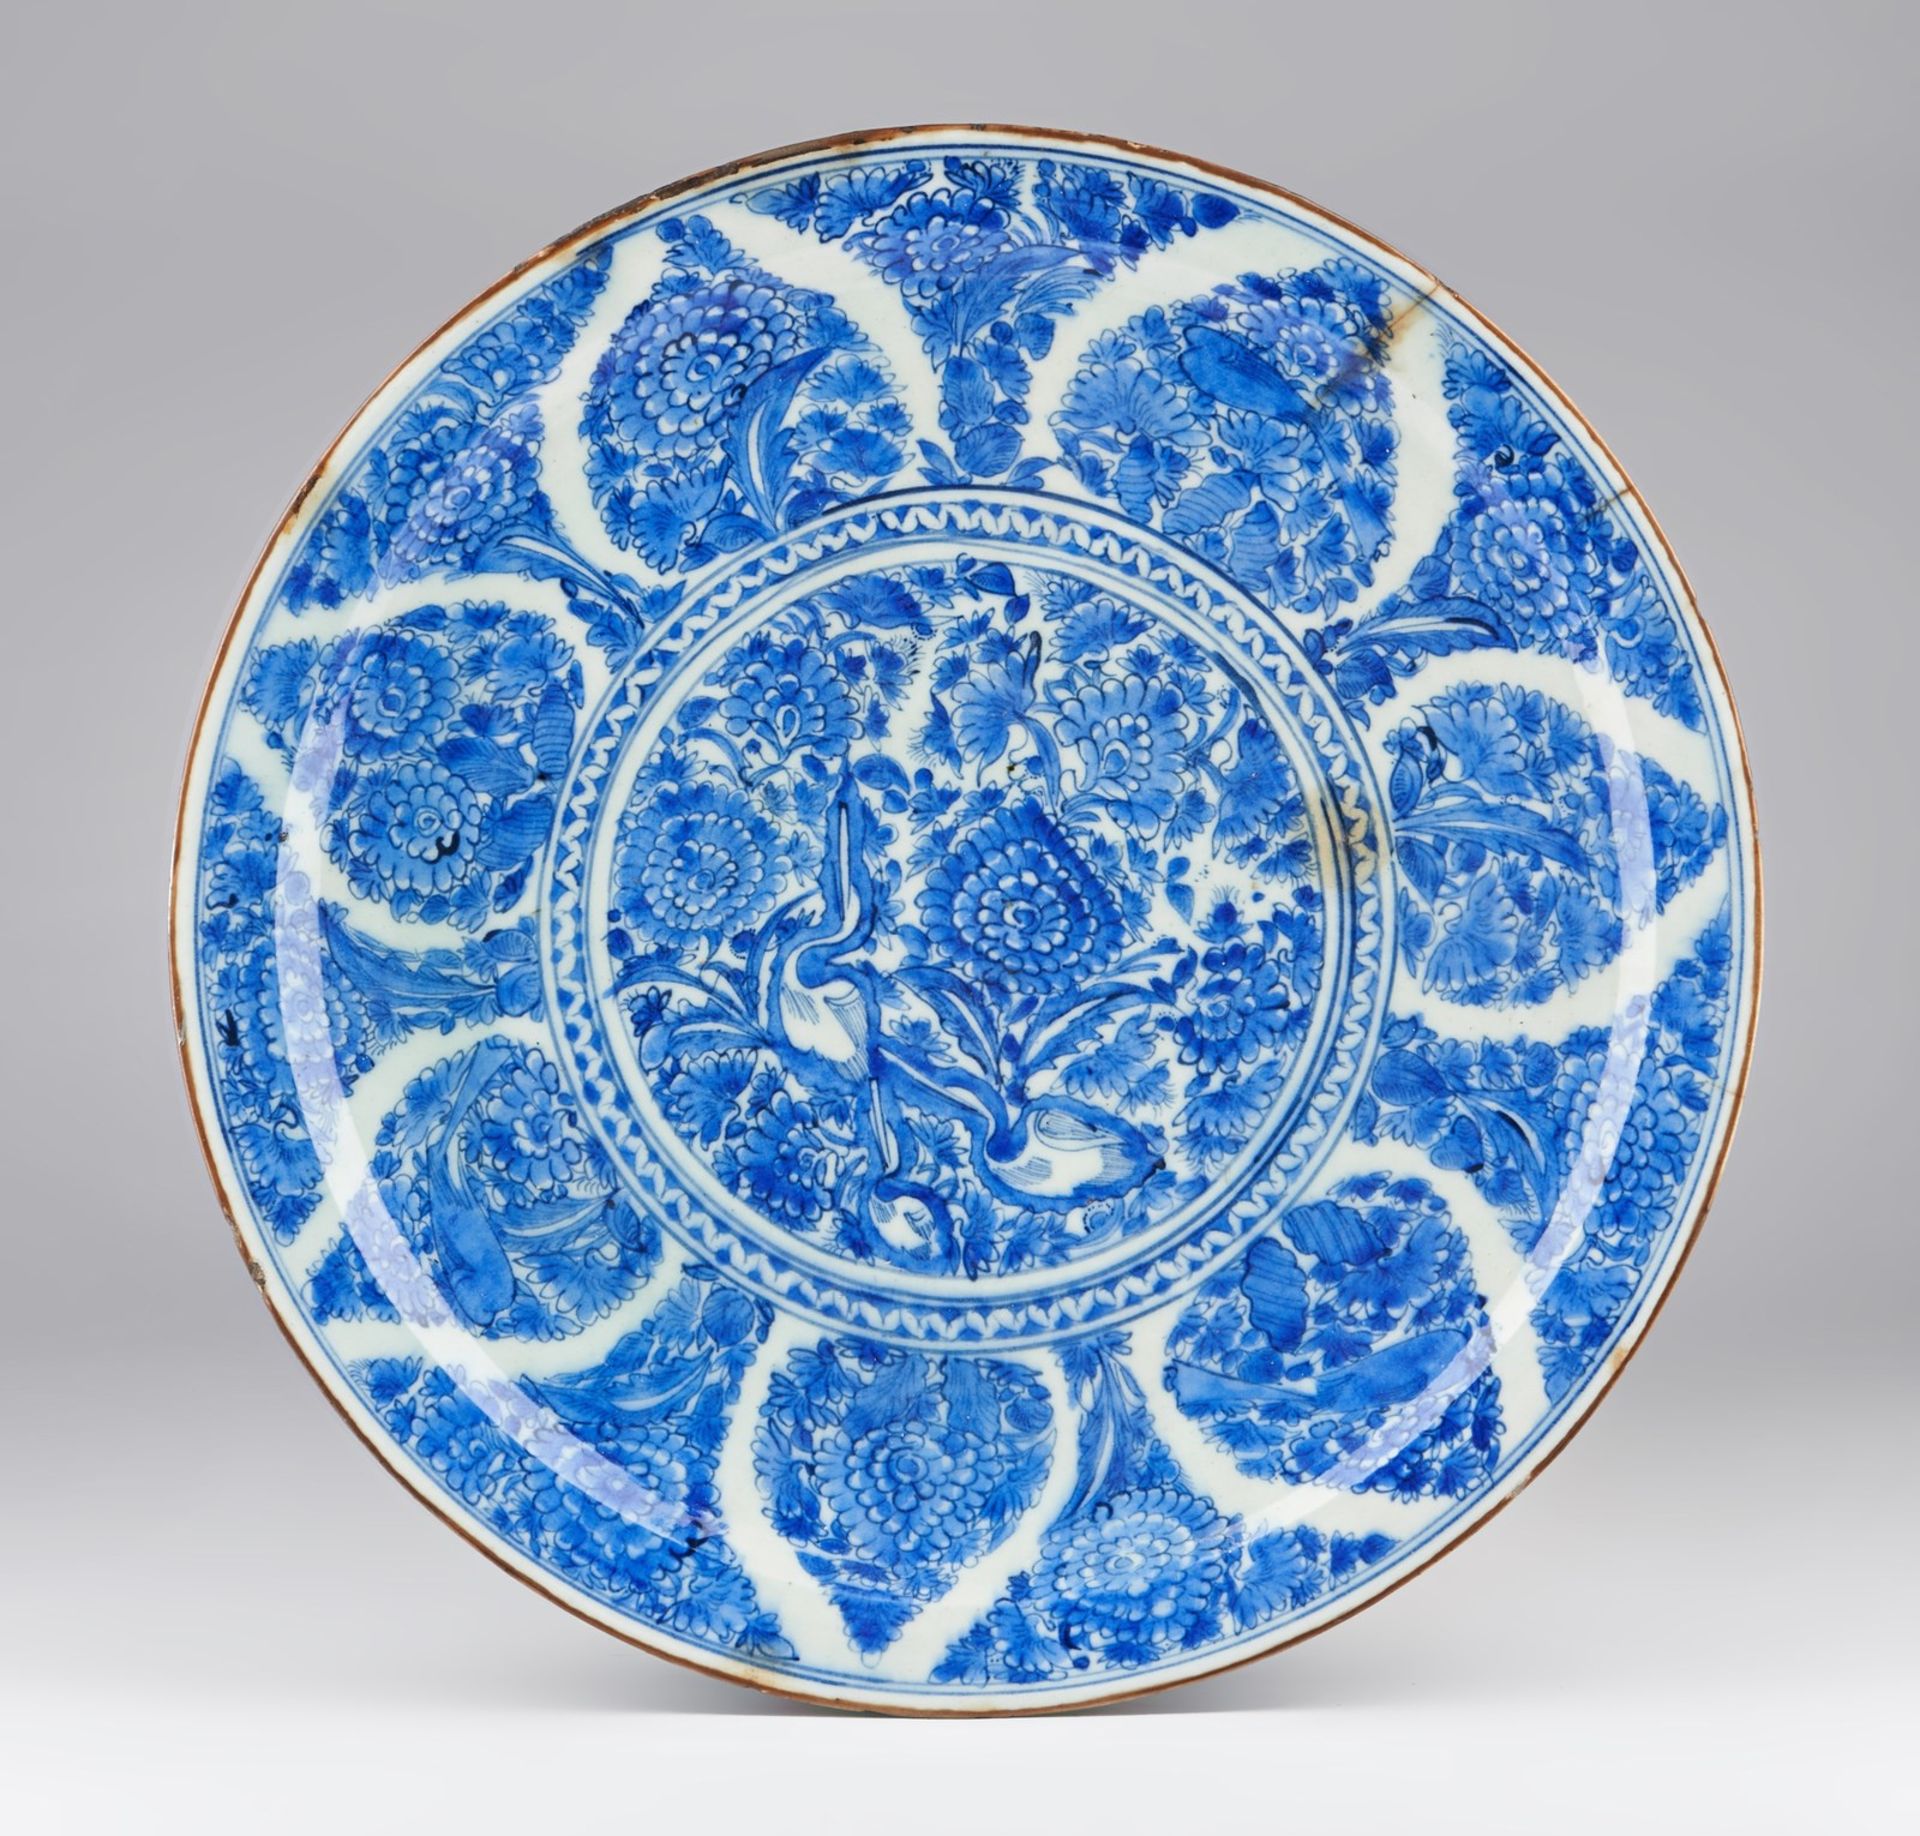 Arte Islamica A large Safavid blue and white pottery charger in the Chinese taste Persia, 17th cent